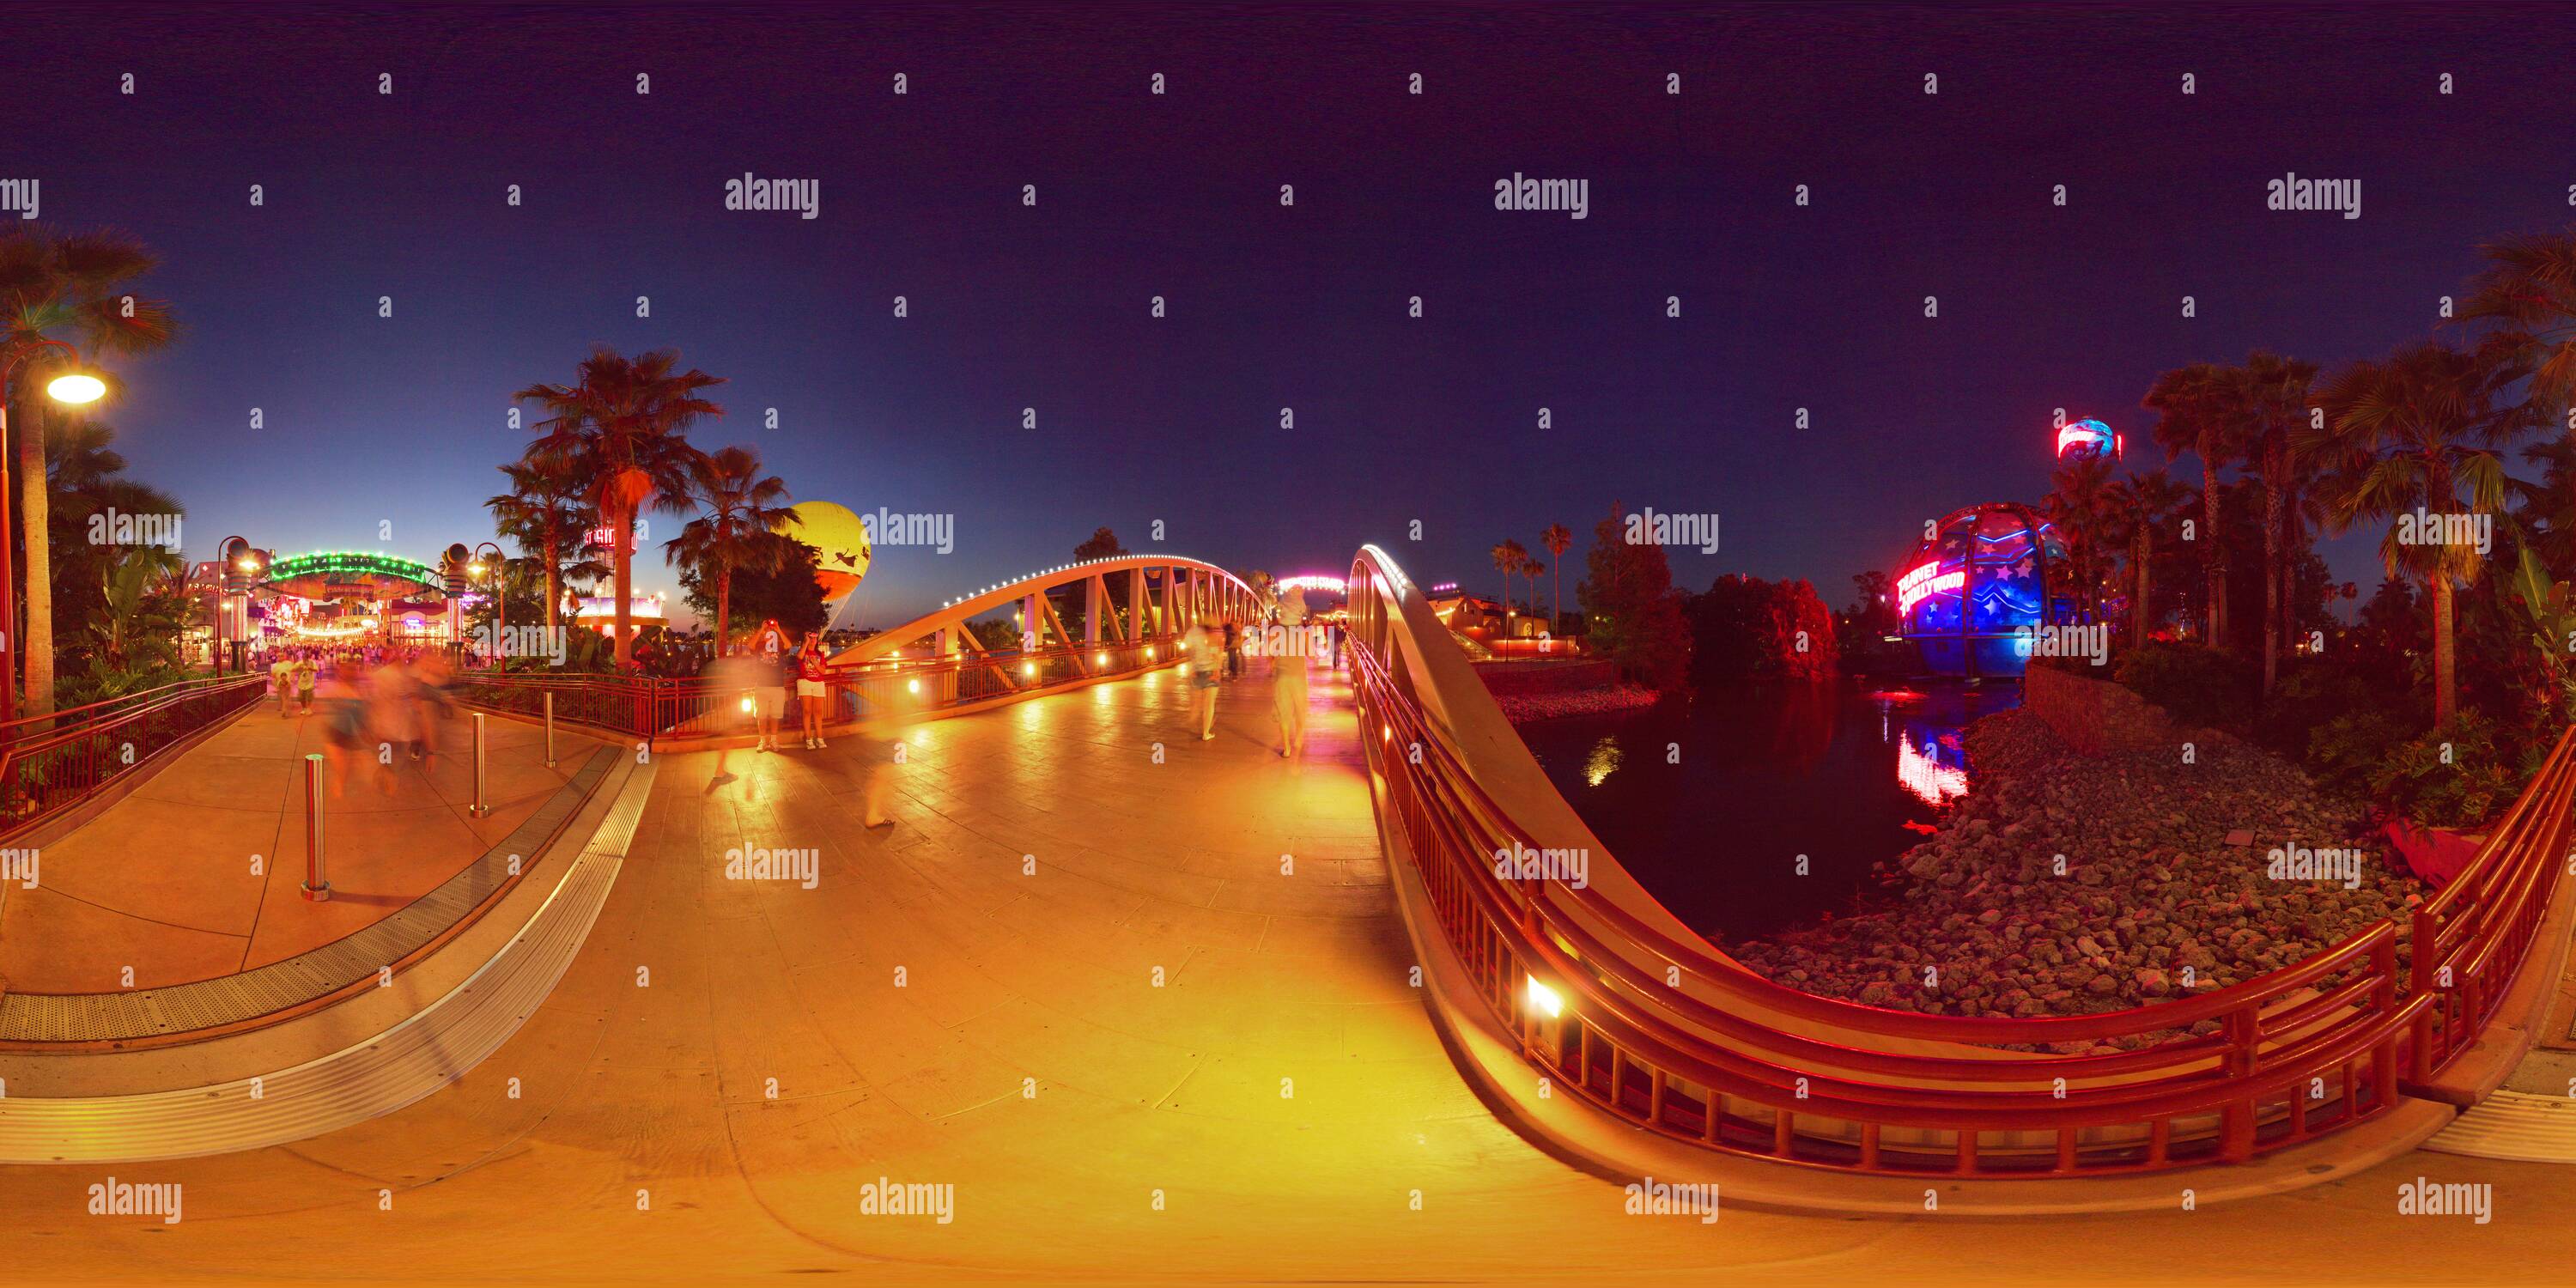 360° view of Hollywood at night Alamy